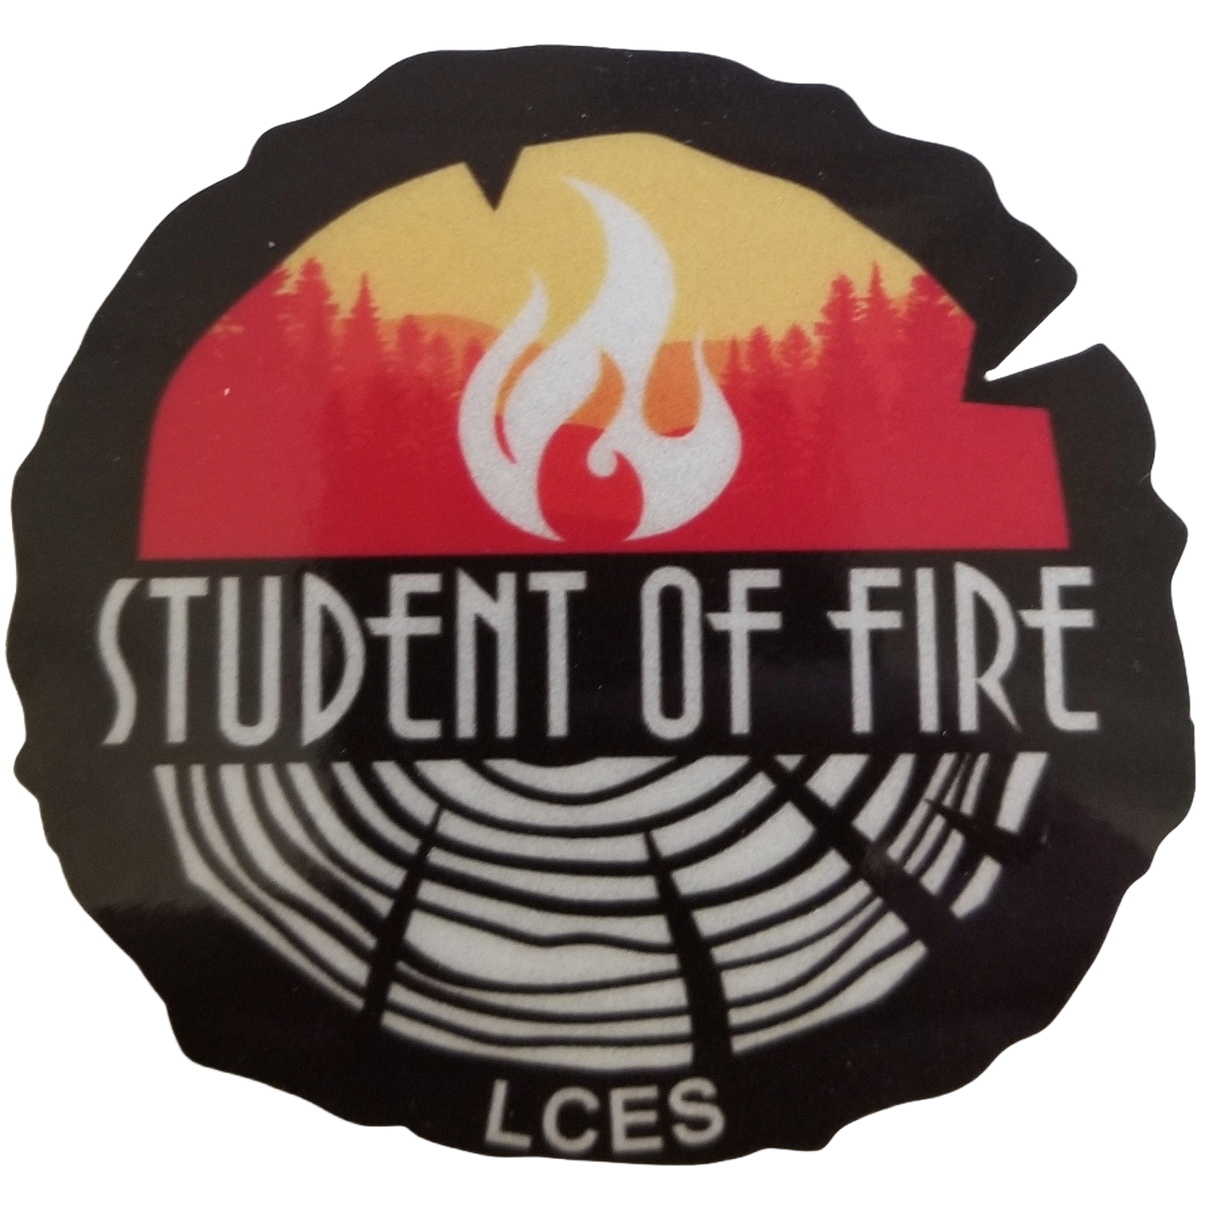 Student of Fire Sticker (3 Inch)